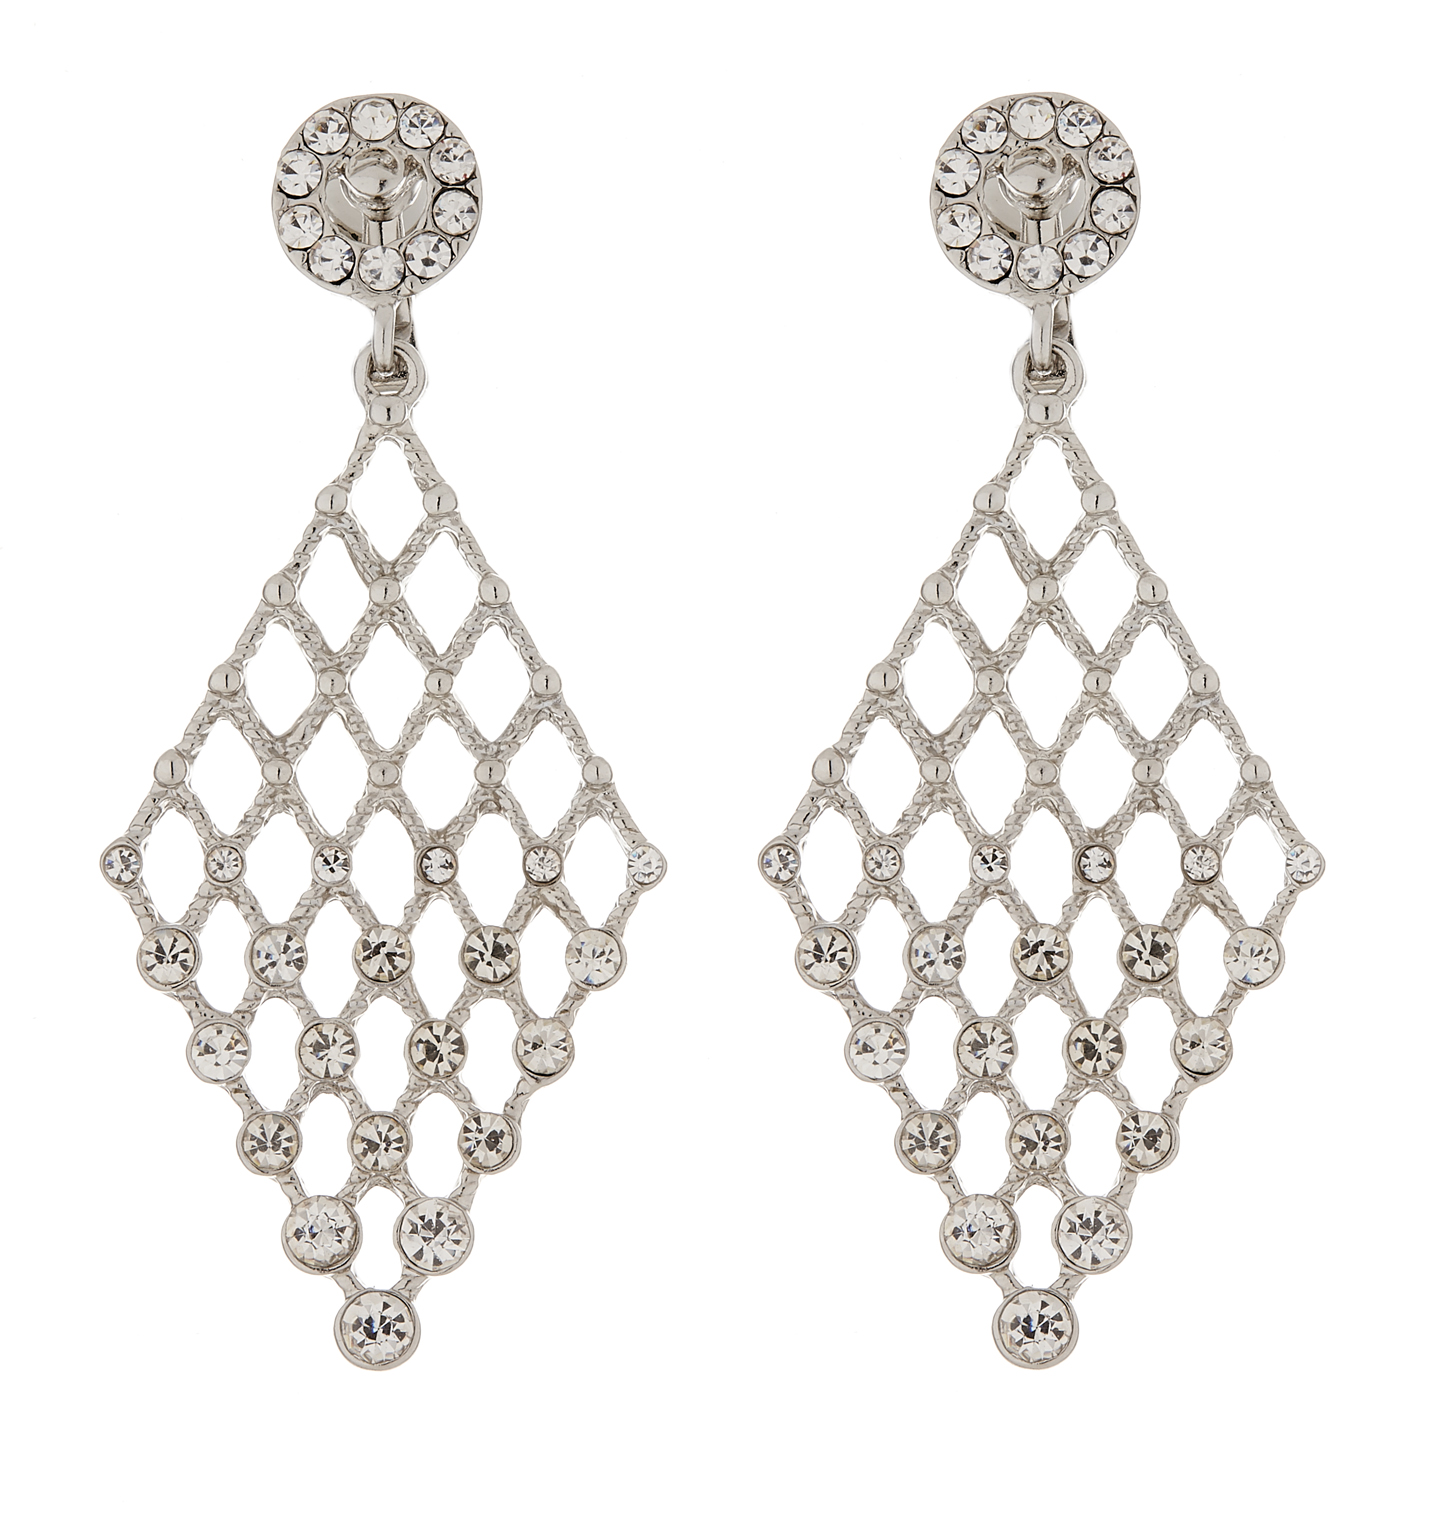 Clip On Earrings - Annie S - silver chandelier earring with clear crystals